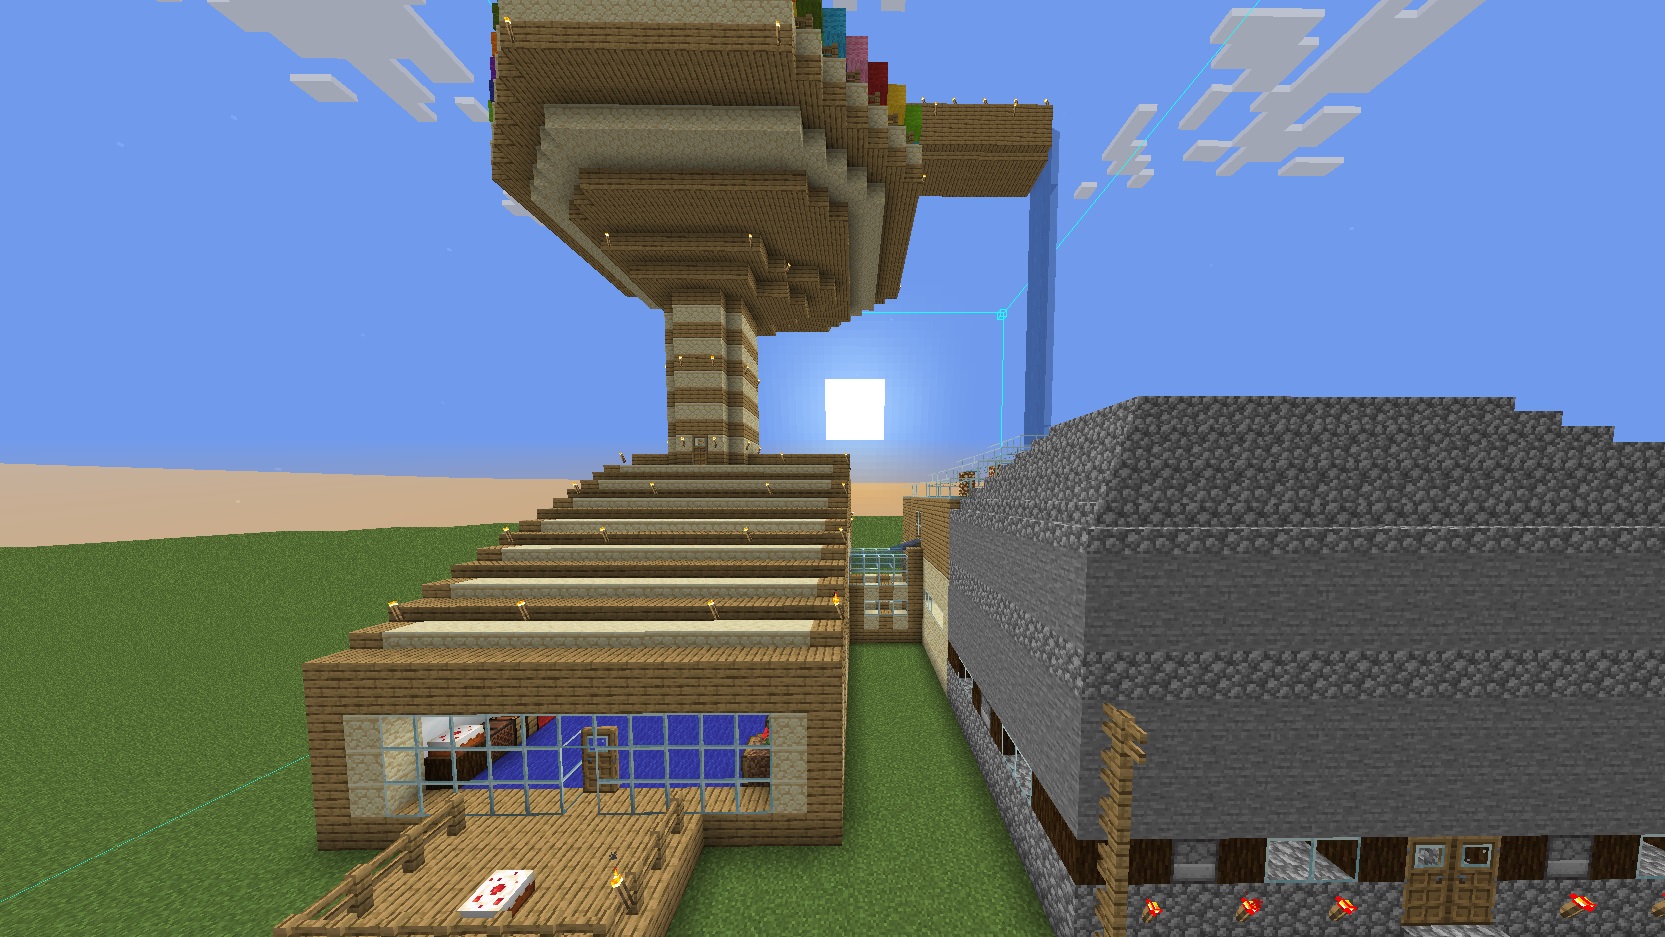 Minecract A Small Recreation of Stampy's House schematic (litematic)